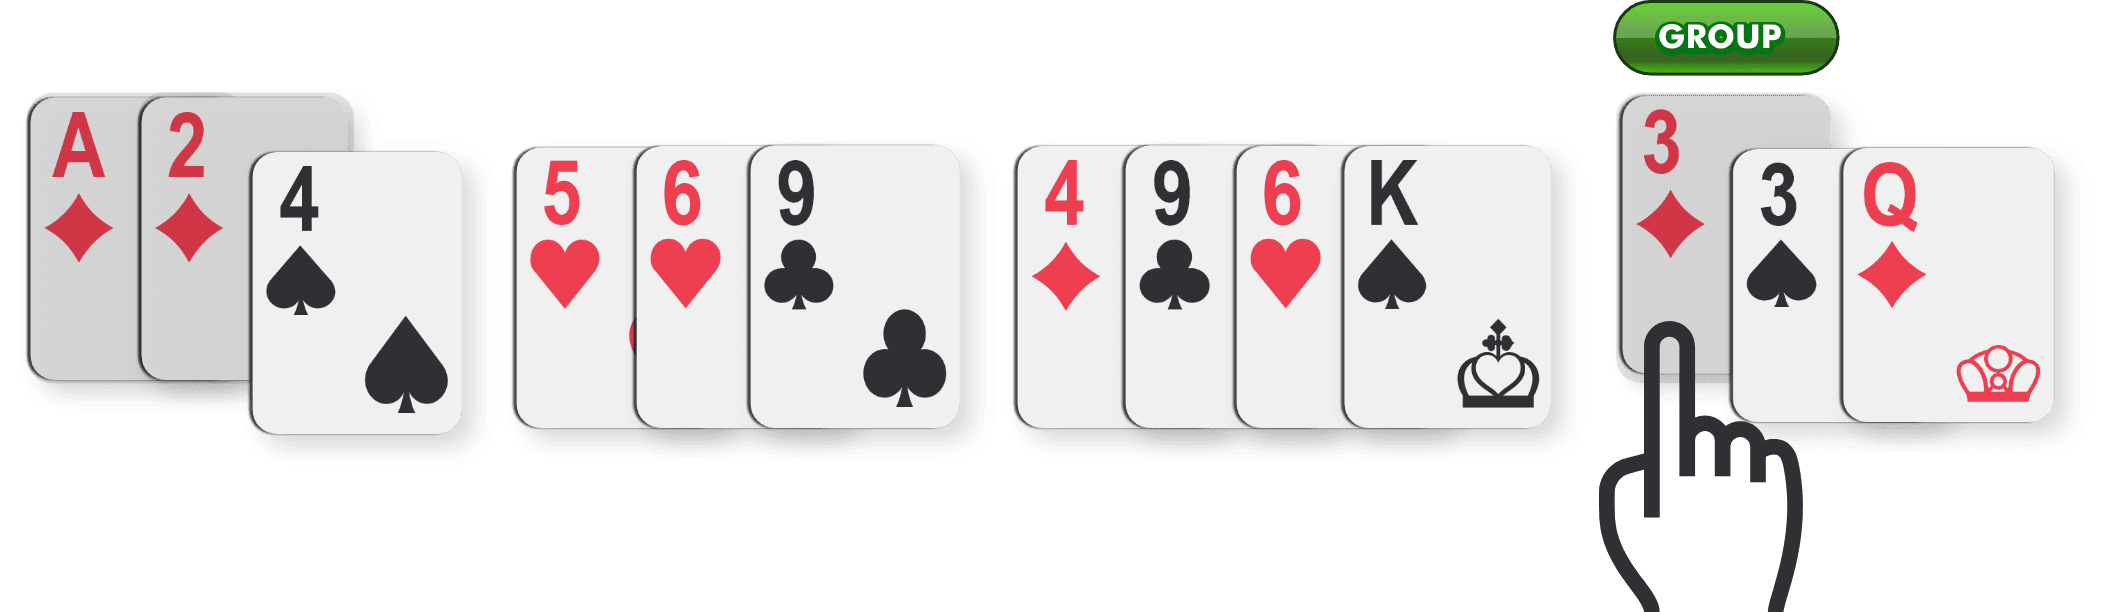 How to Group Rummy Card Game